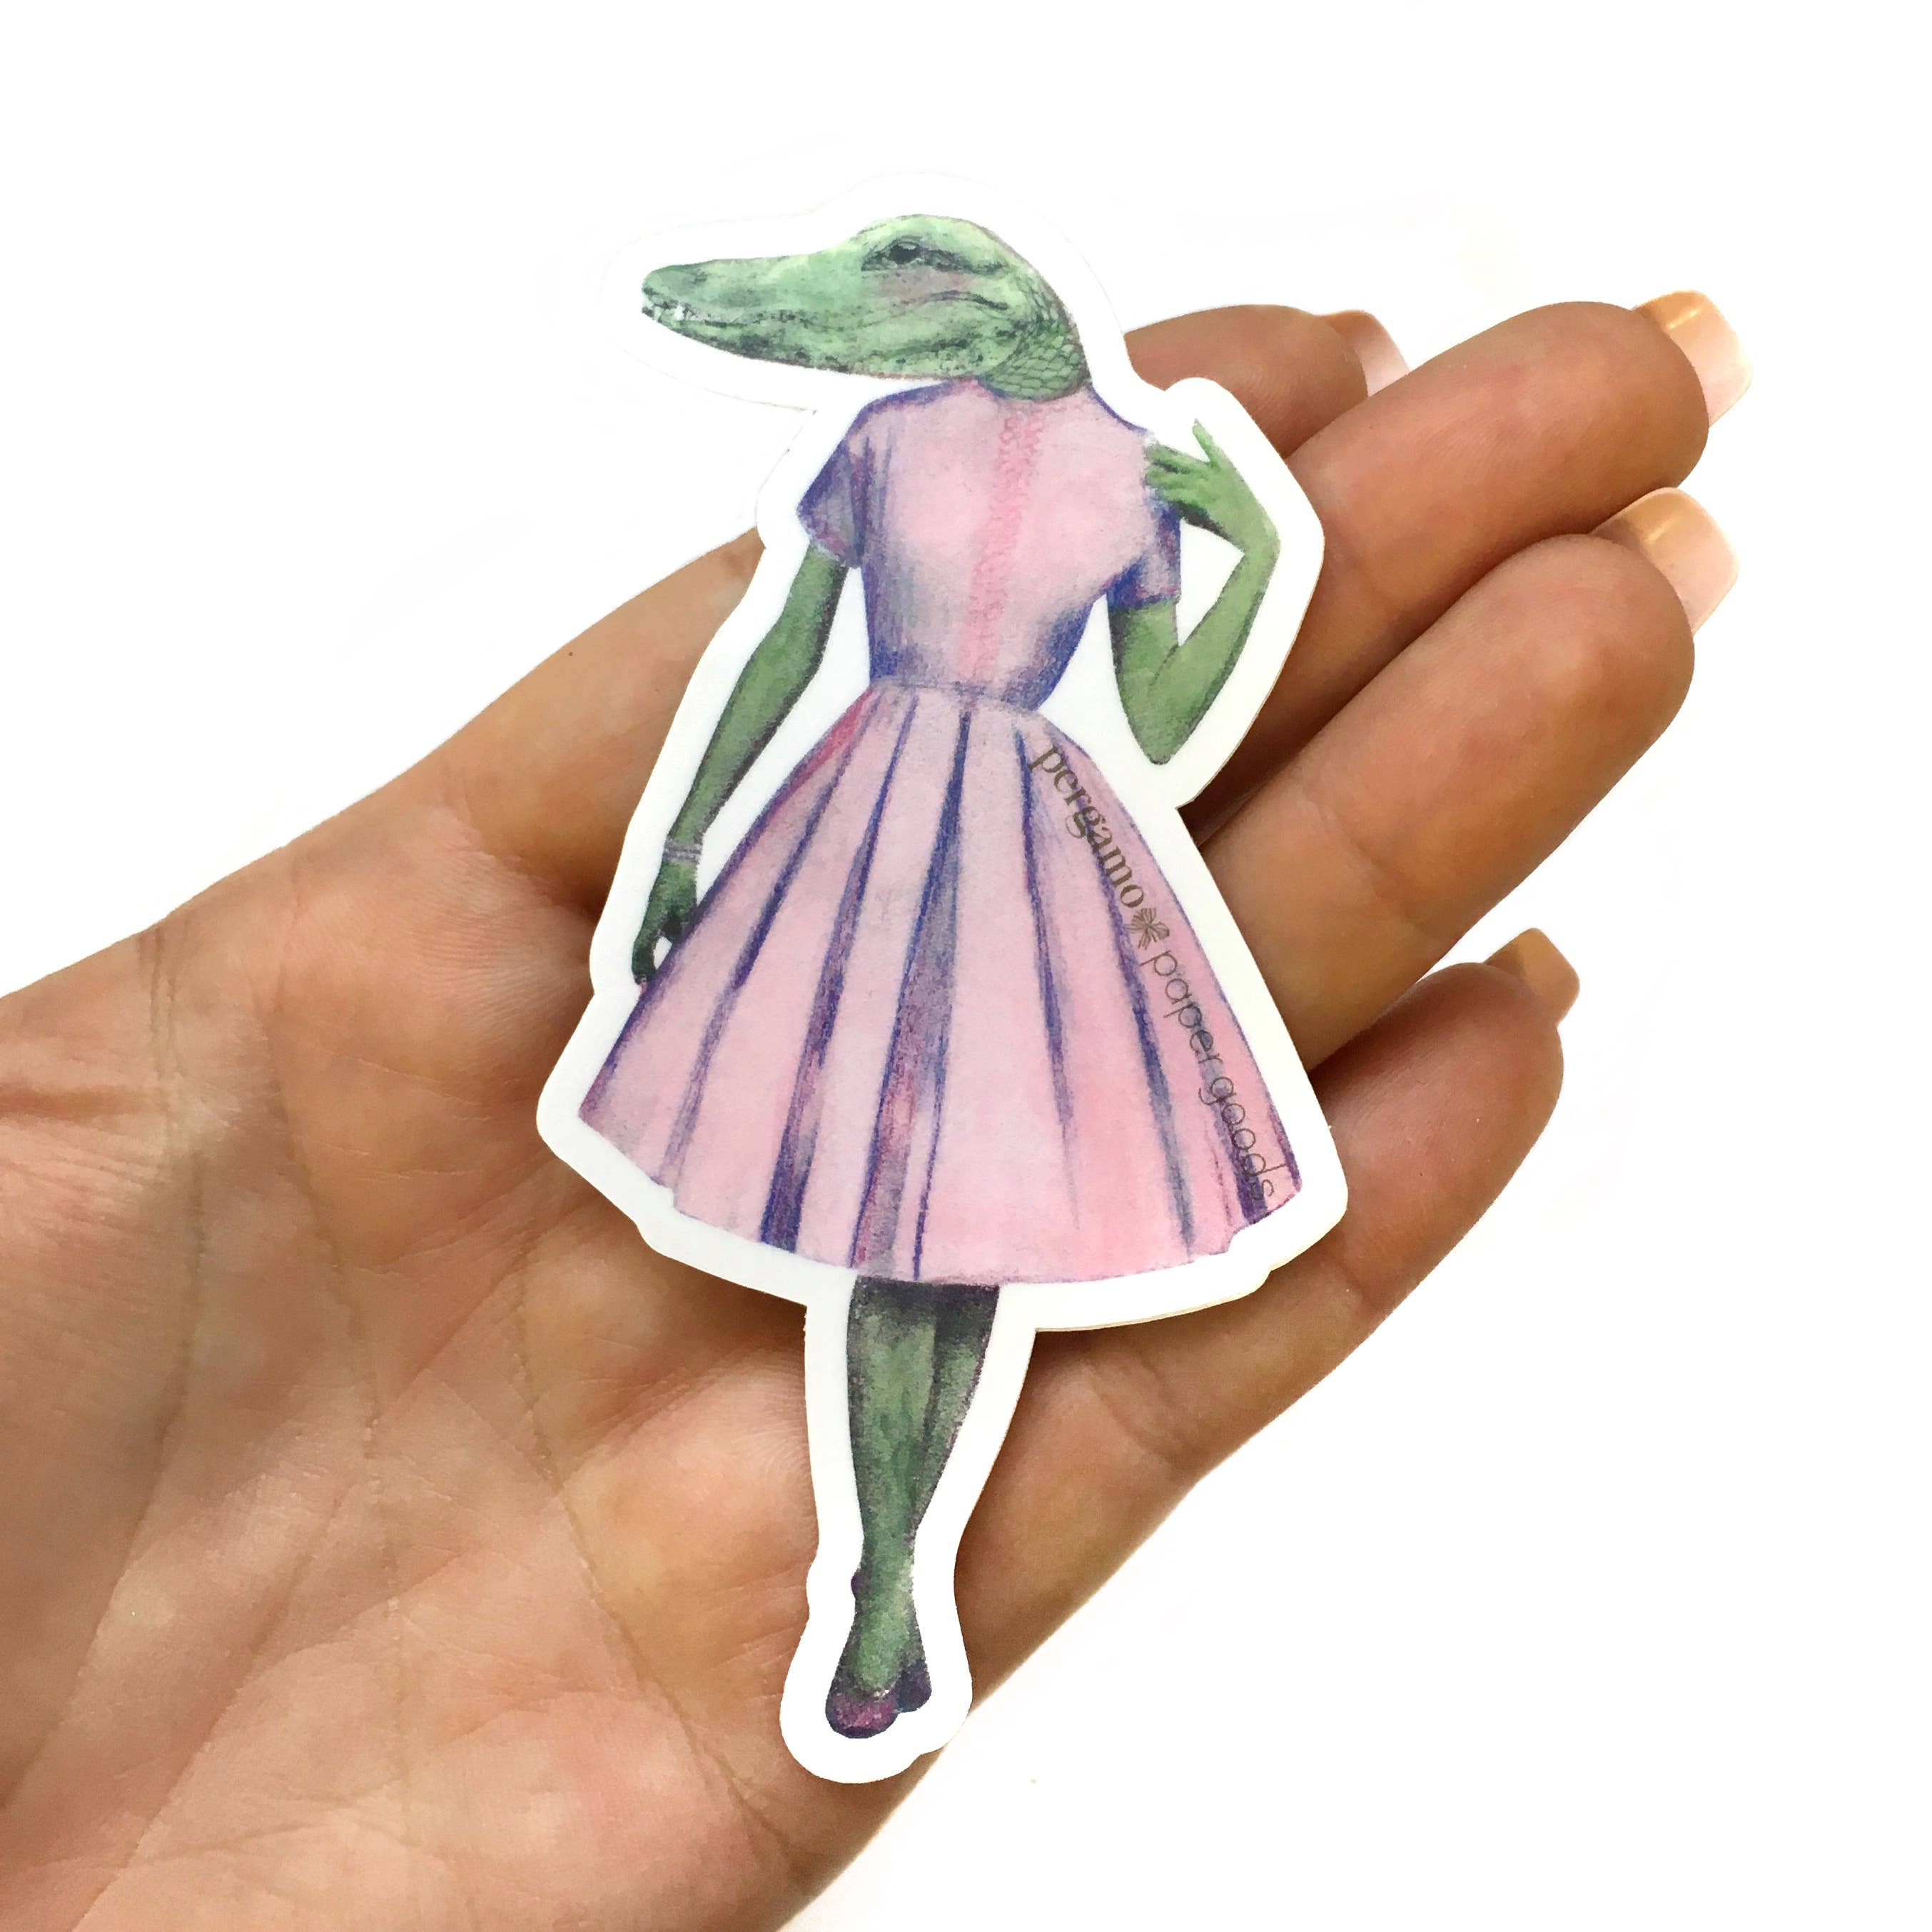 Pink Dress Alligator Lady Illustrated Animal Vinyl Sticker - Out of the Blue